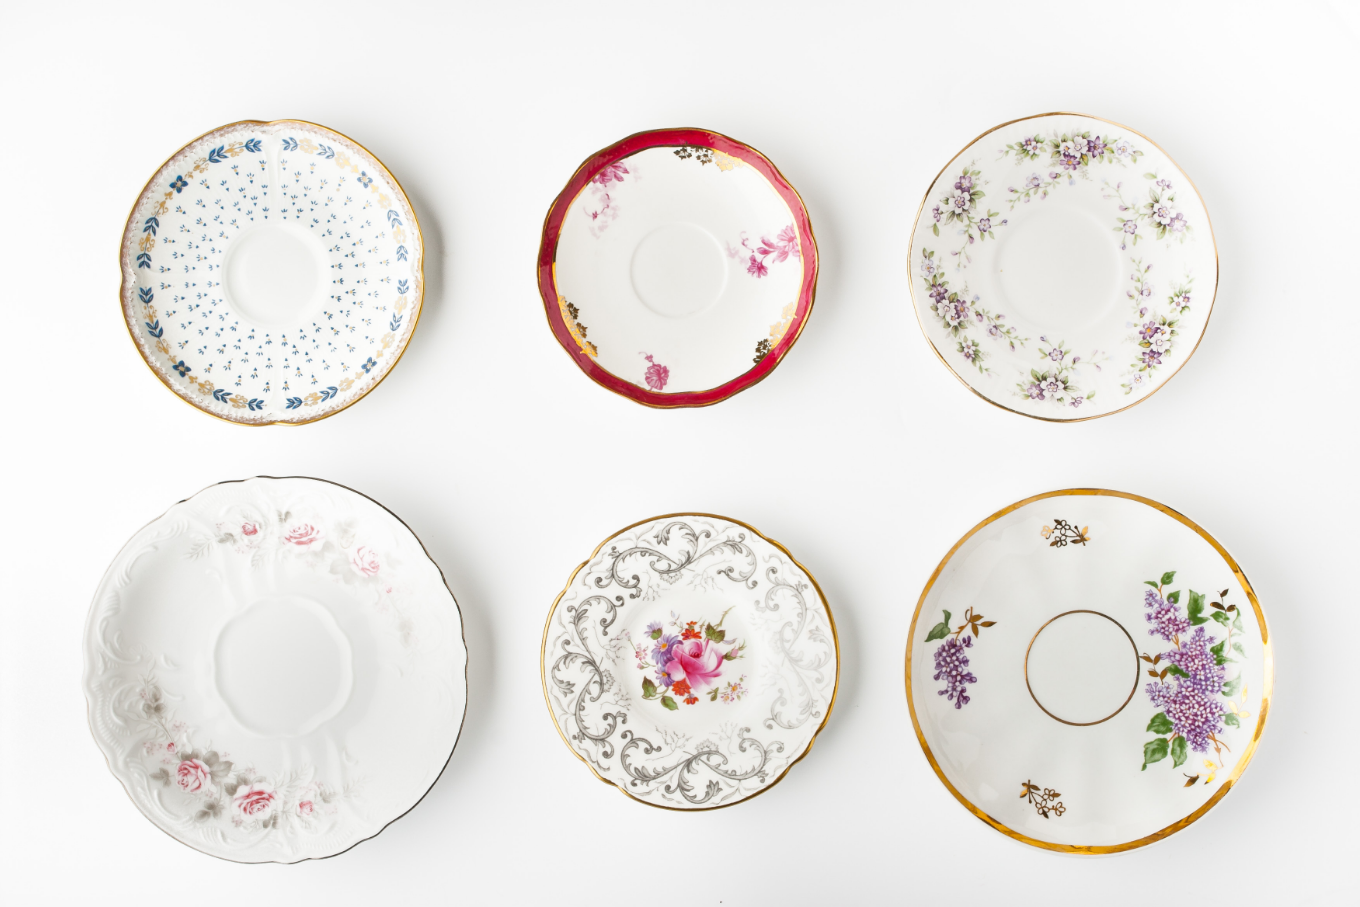 Are Plates Worth? (Value and Price Guide)